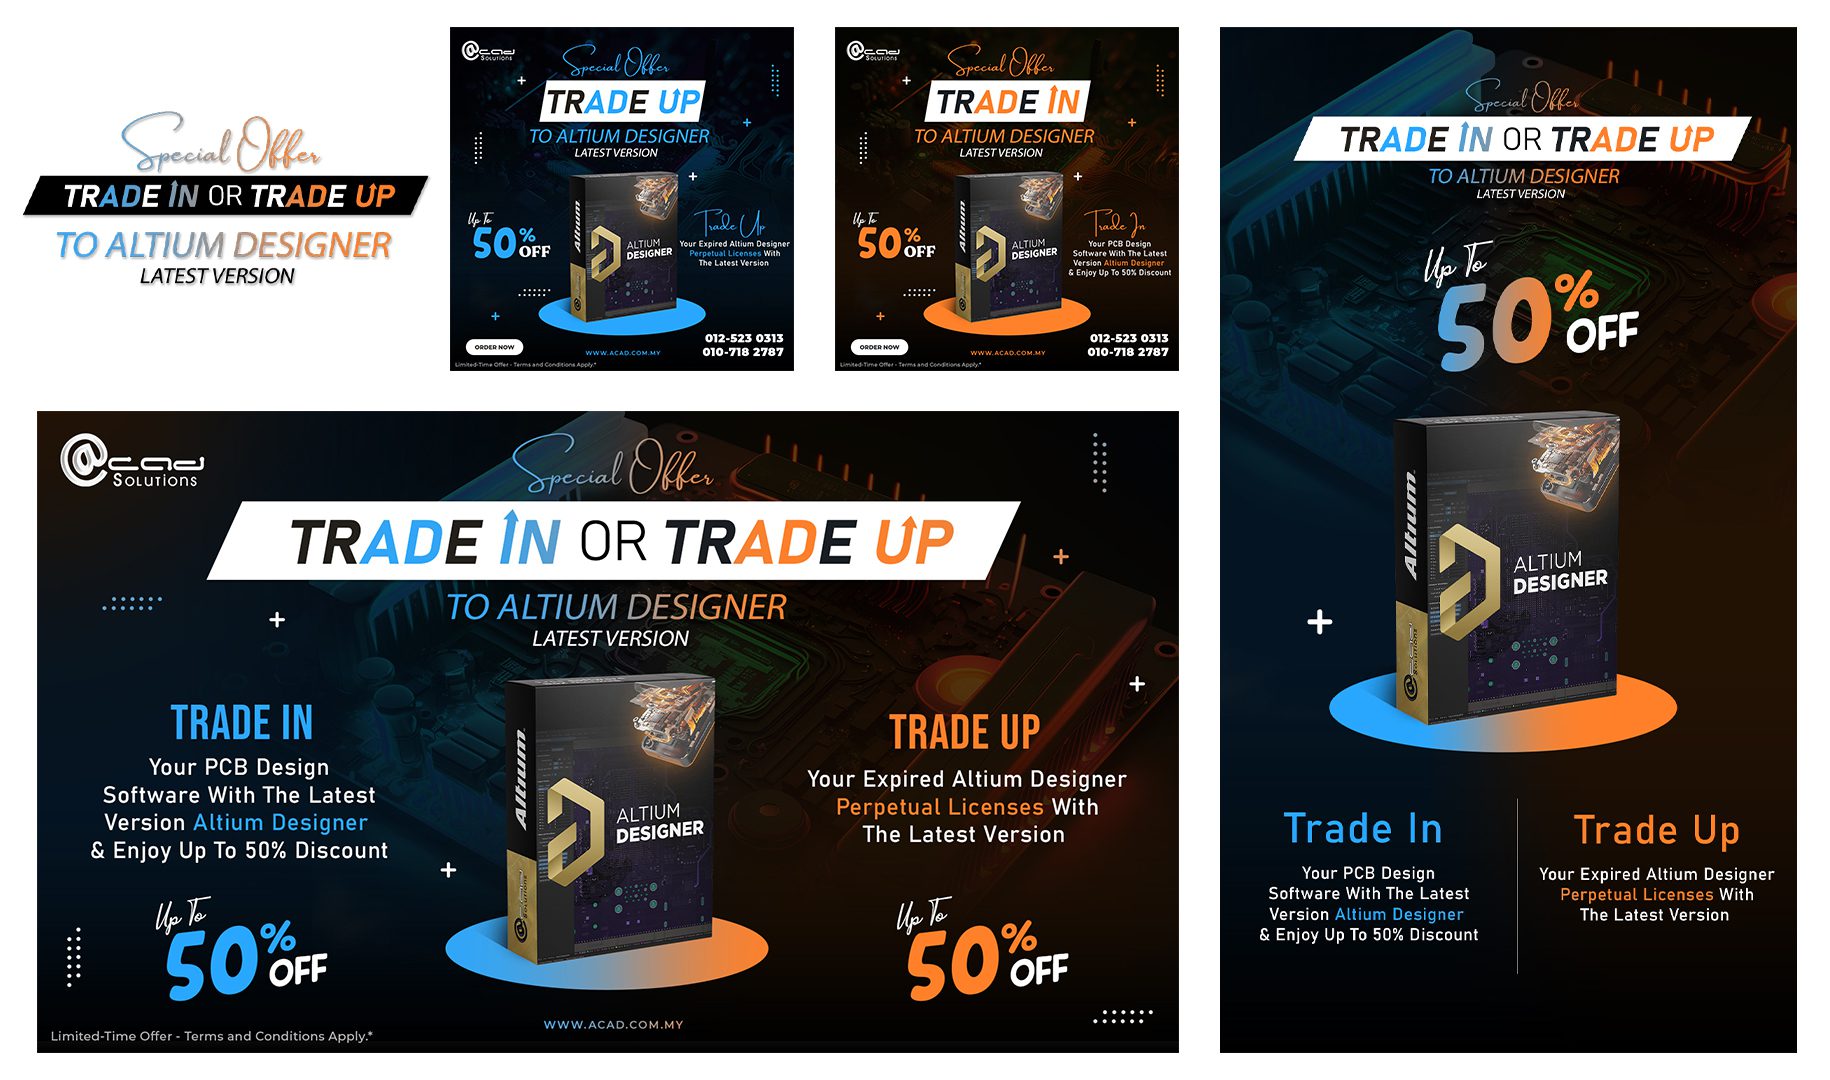 Trade In or Trade Up Campaign